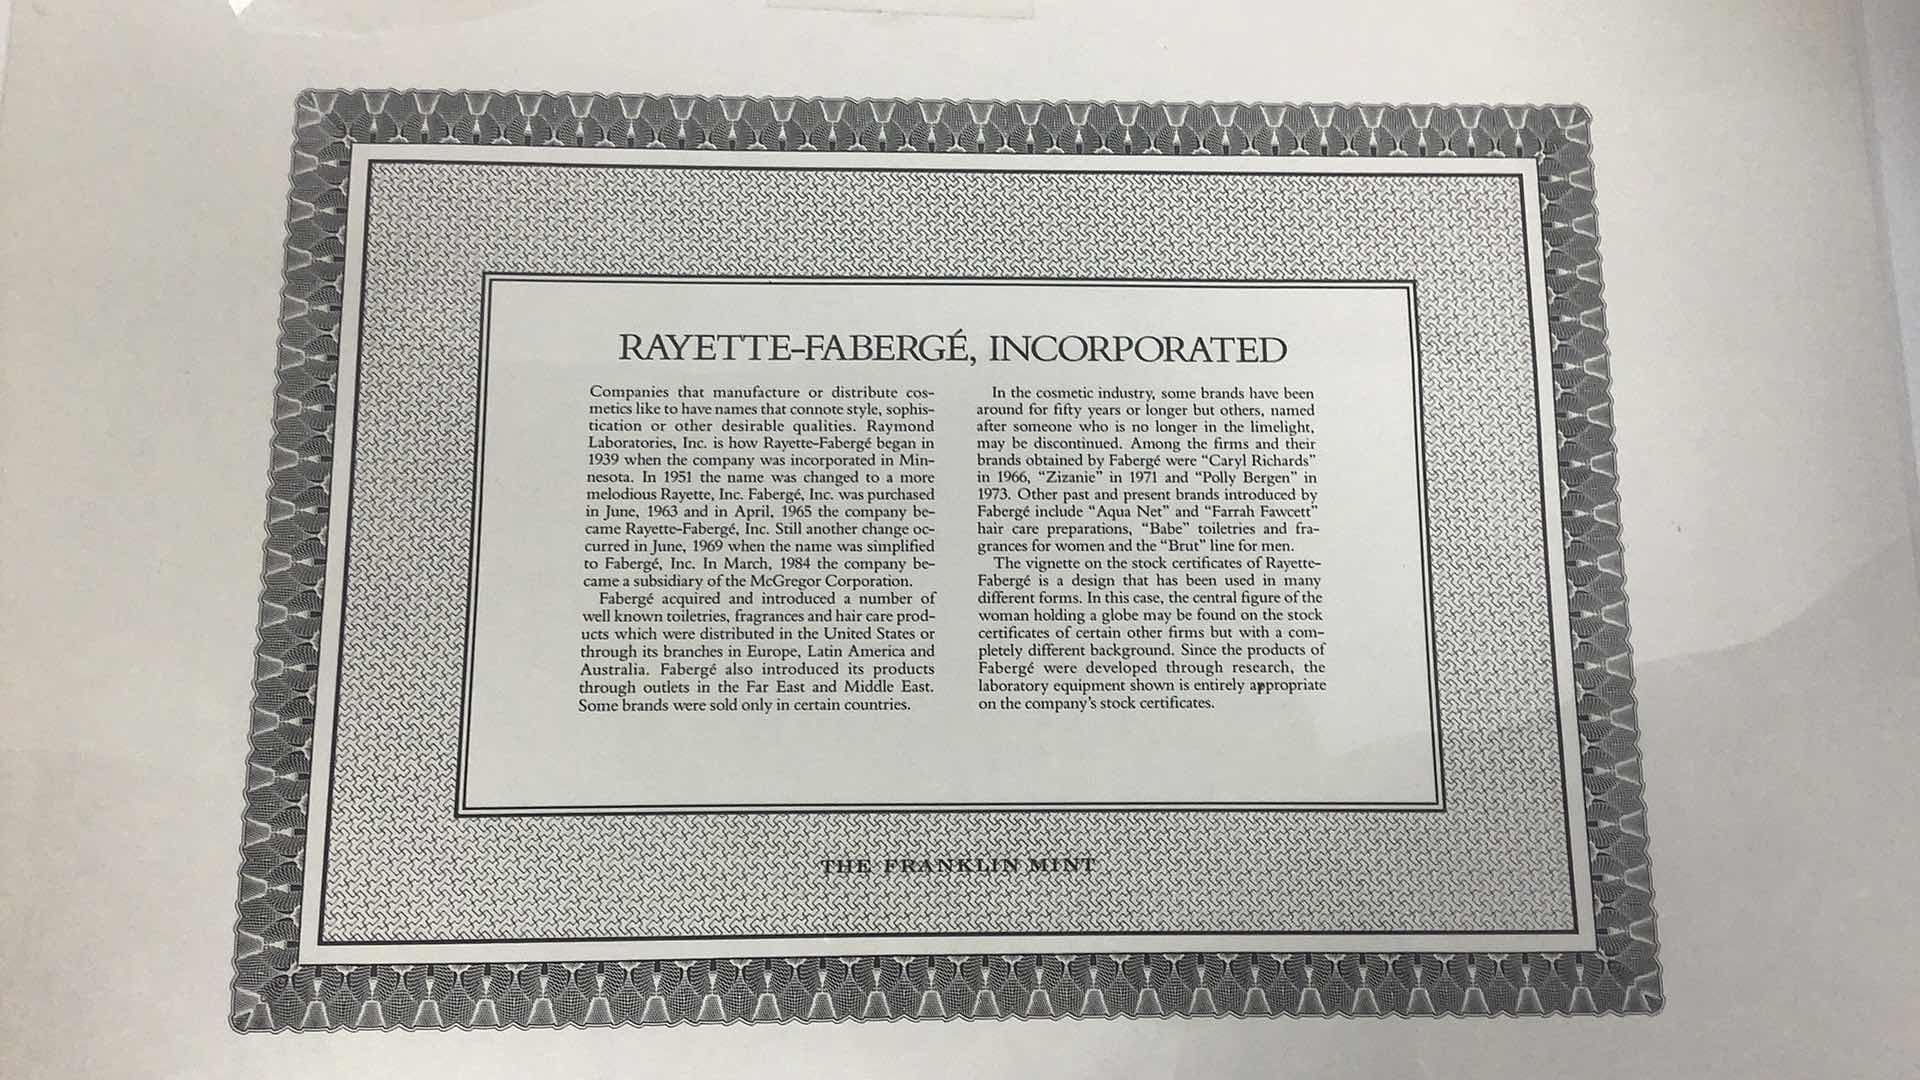 Photo 3 of FRANKLIN MINT, VINTAGE ABACUS AND RAYETTE-FABERGE INC 100 SHARES